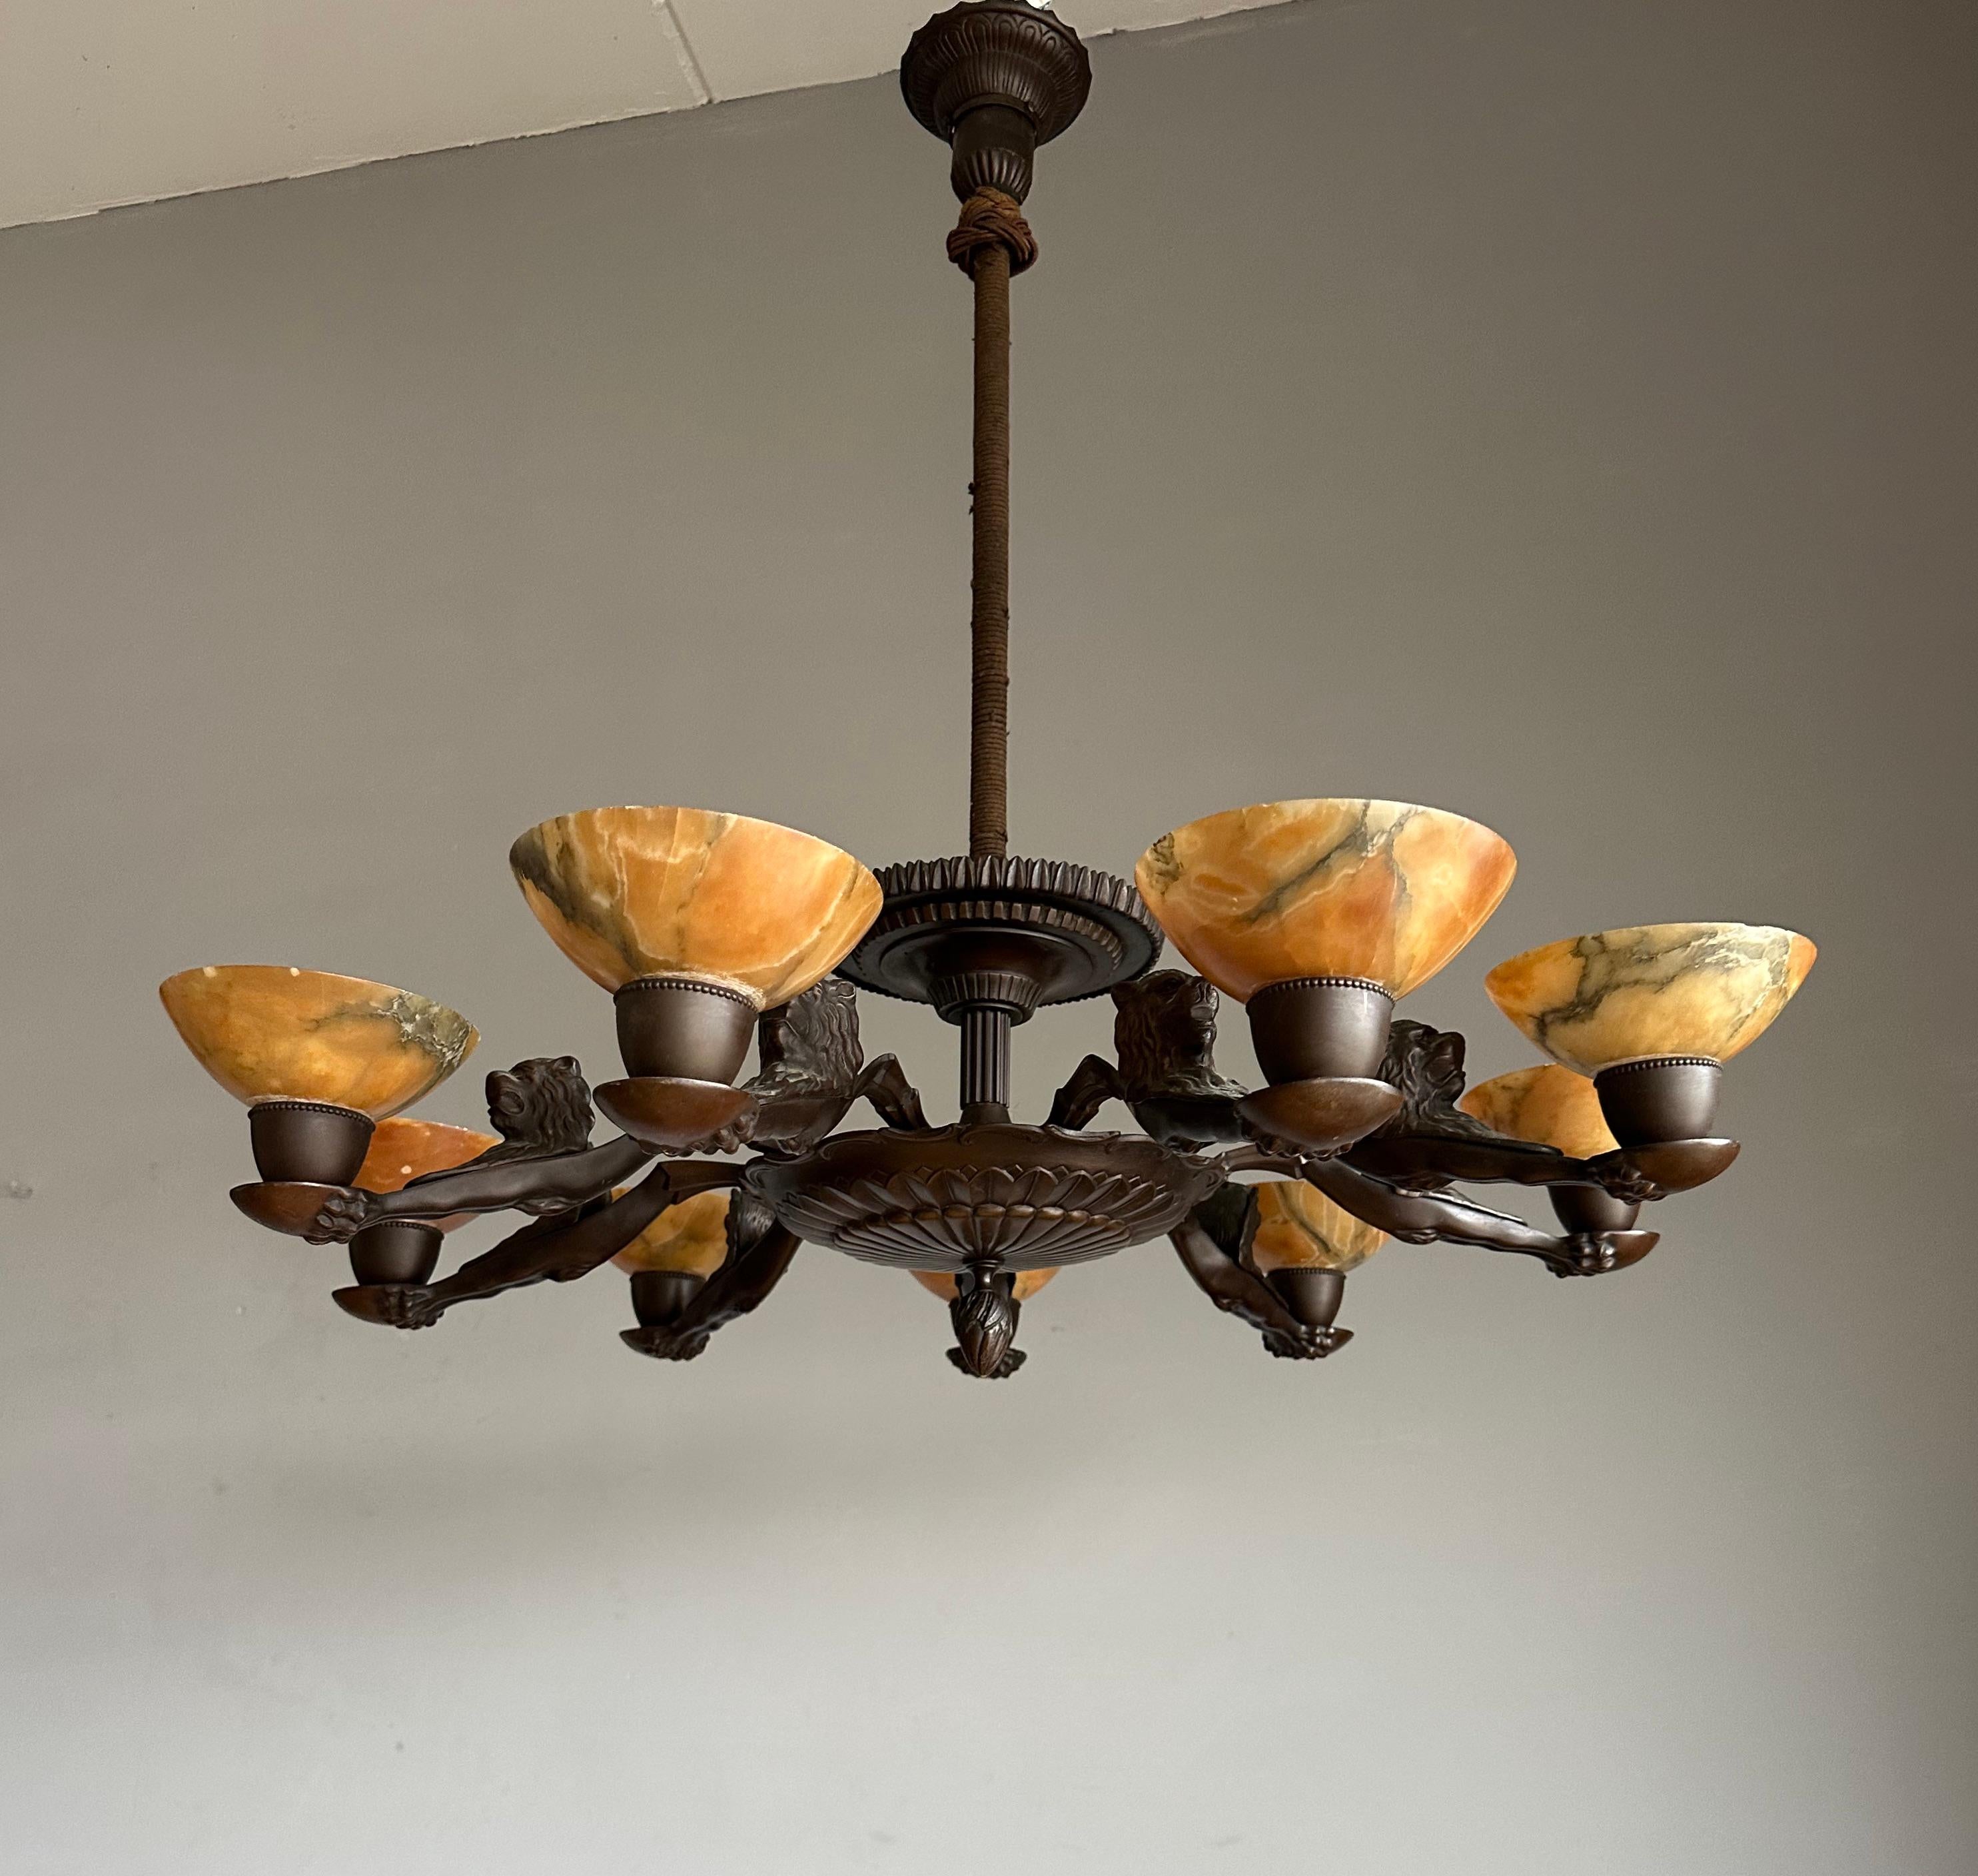 Highly stylish bronze pendant light with nine organic, amber color alabaster shades.

If you are looking for a truly stylish antique light fixture to grace your dining room or kitchen then this handcrafted work of art pendant from the 1920s could be